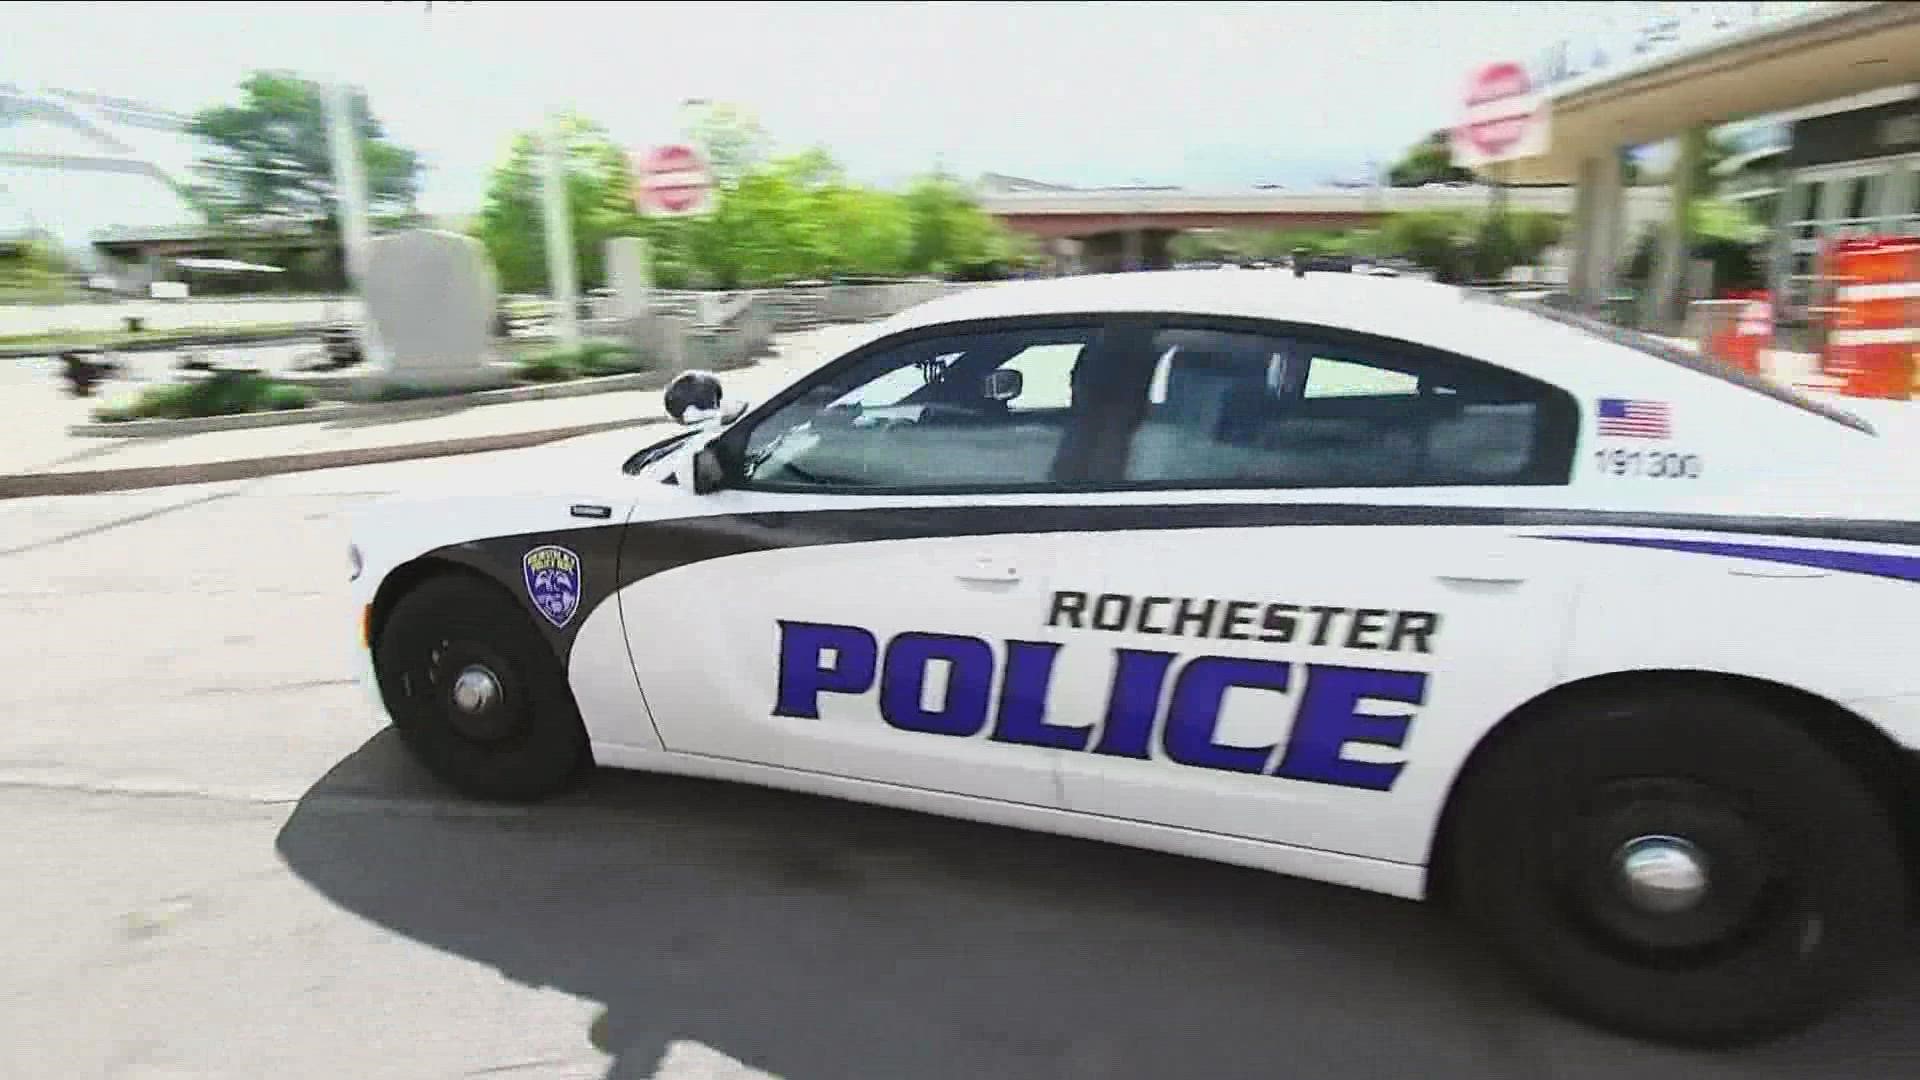 The City of Rochester has reached a settlement with the estate of Daniel Prude